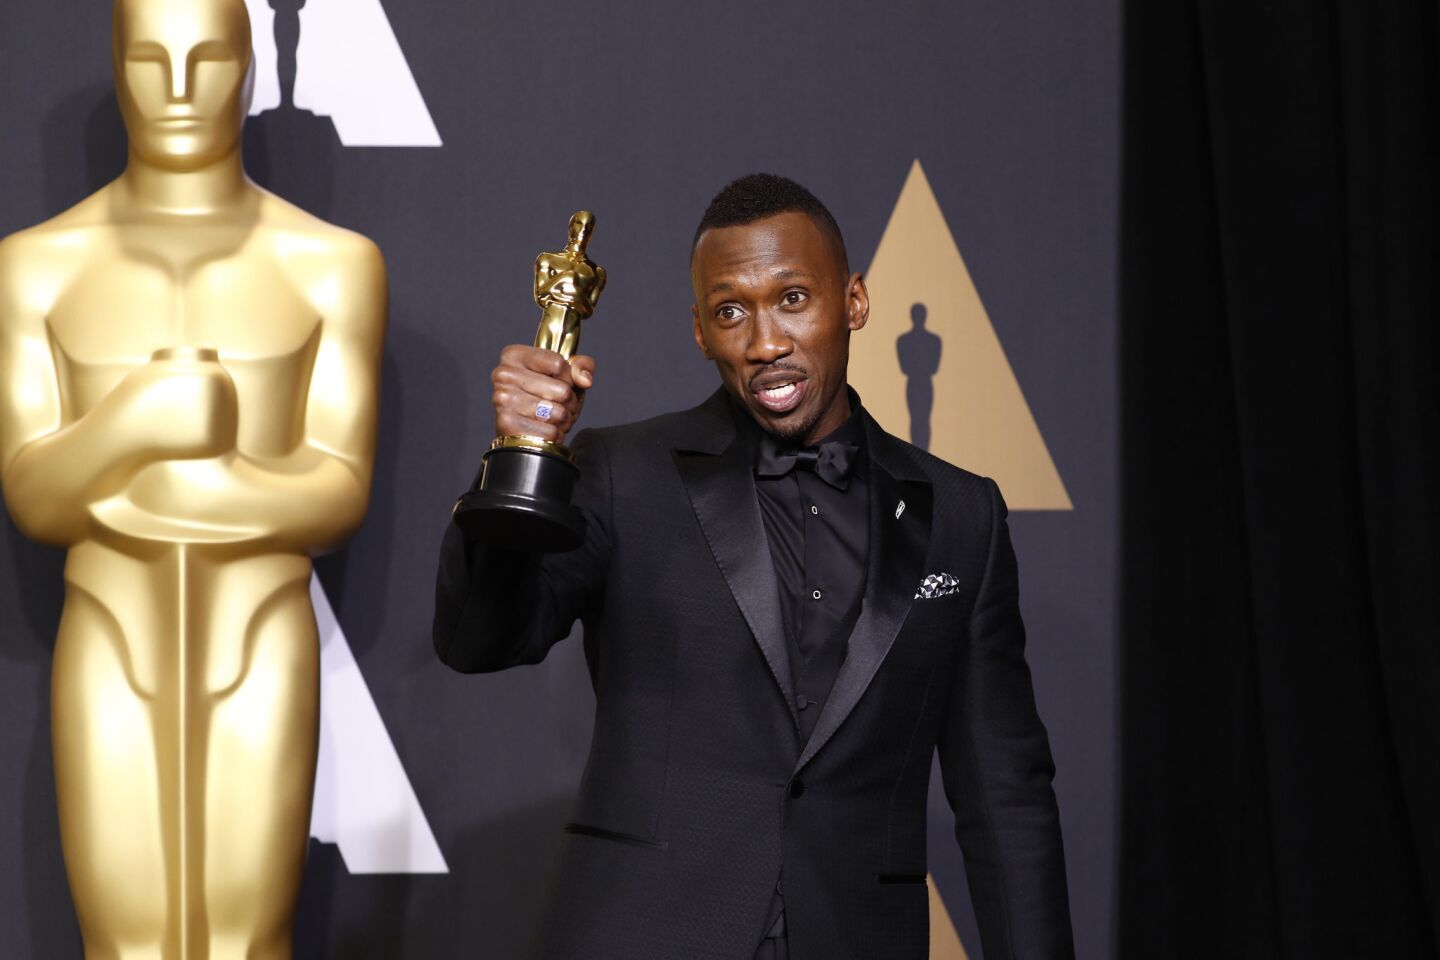 Mahershala Ali won the Oscar for supporting actor for "Moonlight."